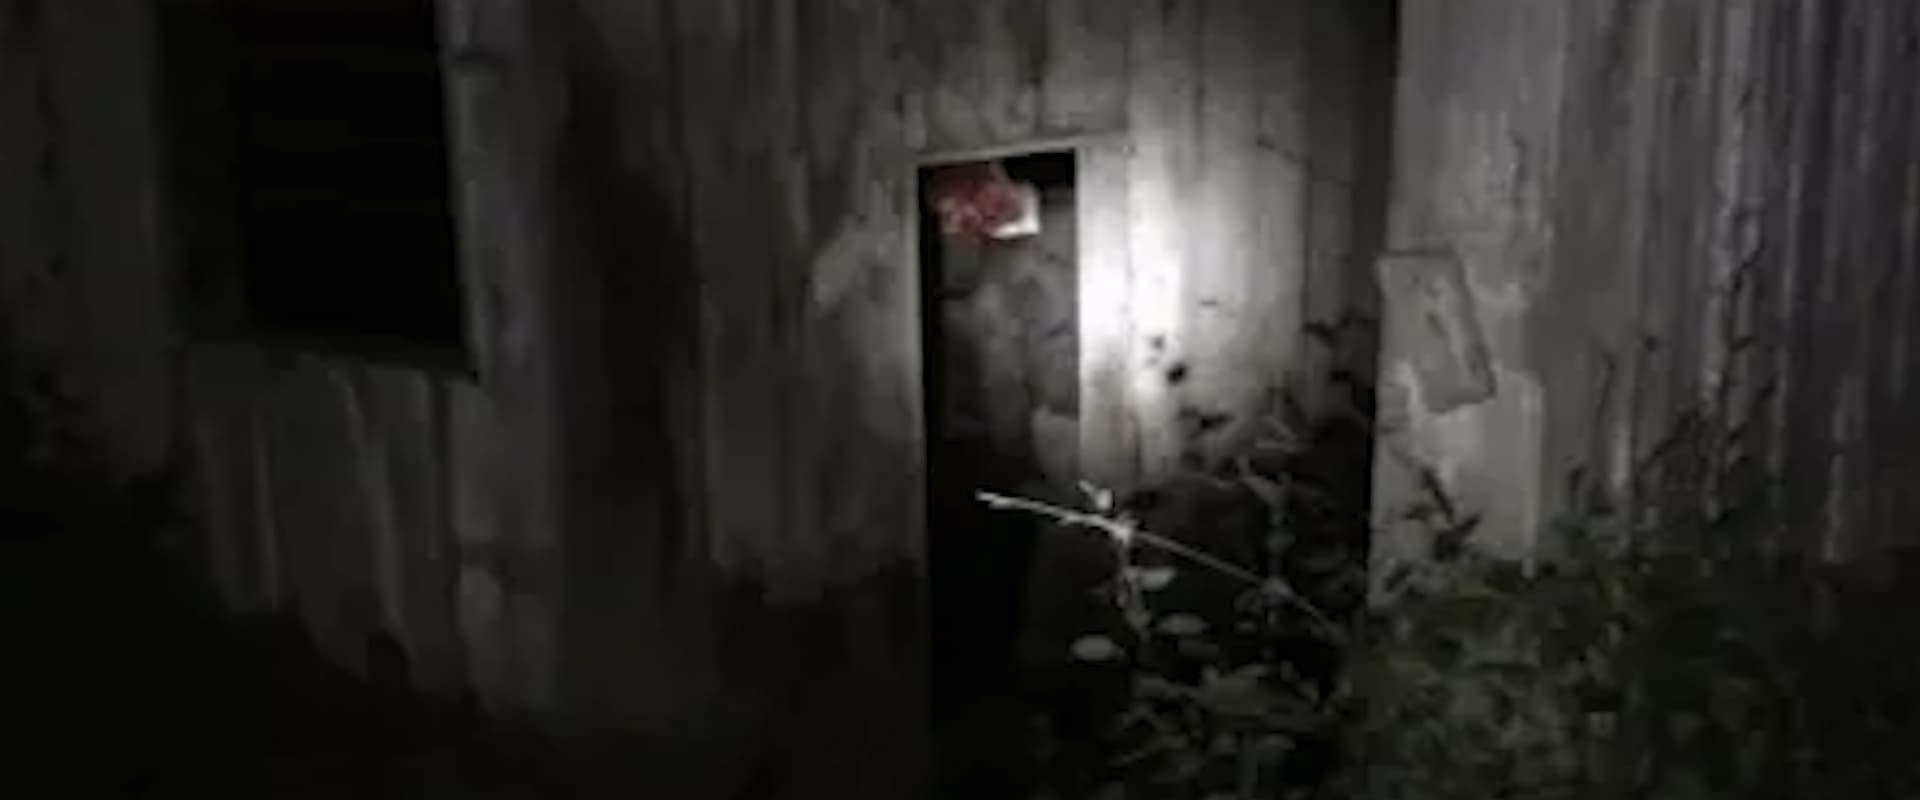 The Fear Footage 3AM